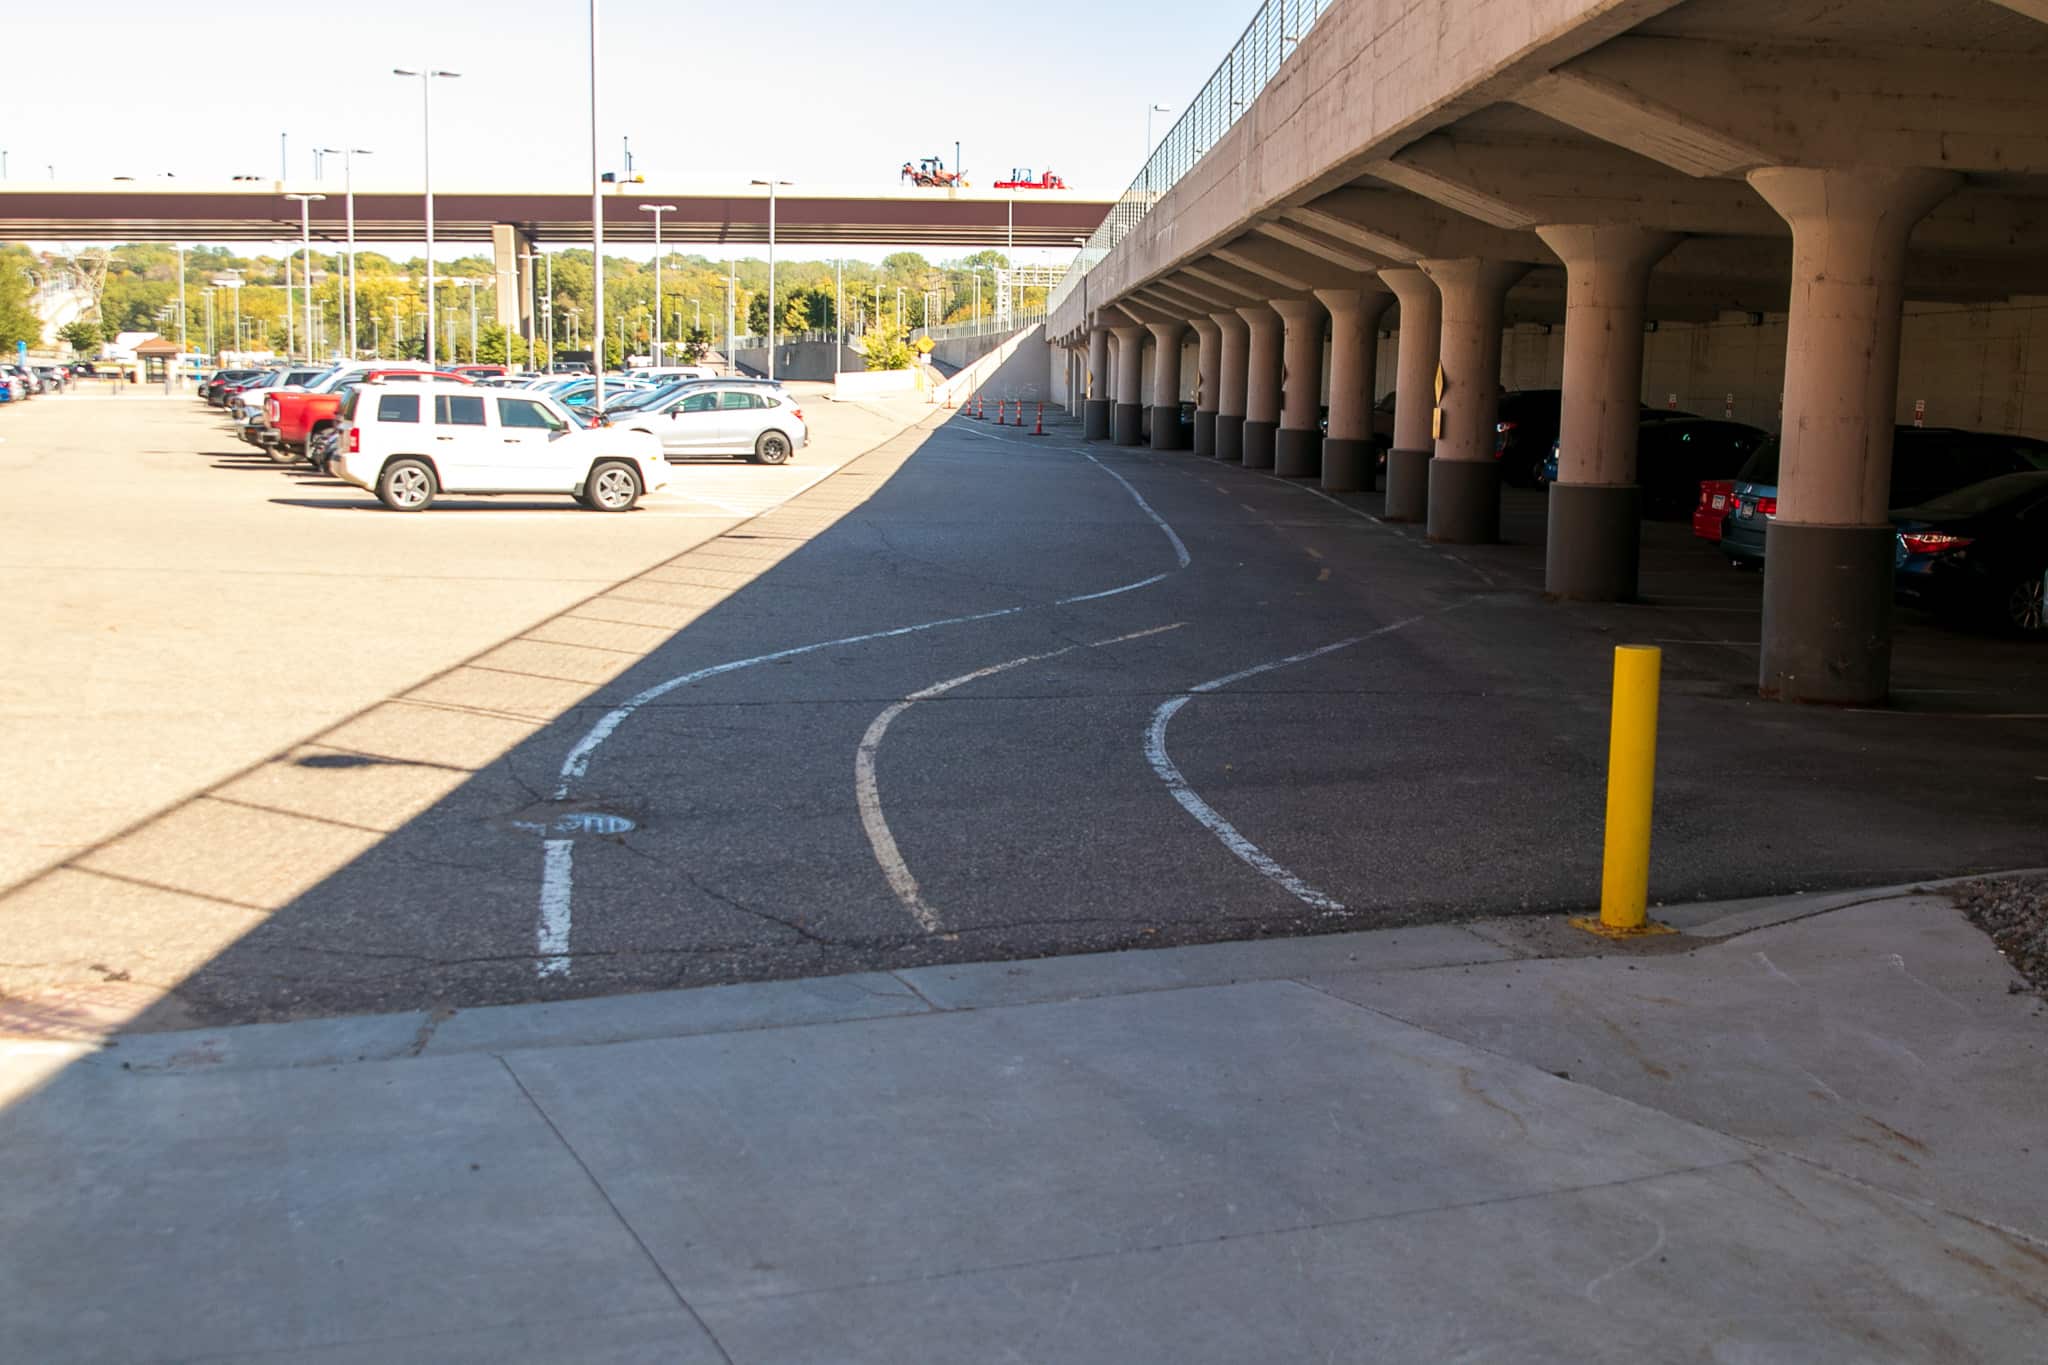 This surface lot, called Union Depot Lot D, isn’t restricted to depot use. I’ve parked here several times on visits to the nearby farmers market. The concrete pillars on the right are part of the support system for the ramps that Metro Transit buses use to access the depot.